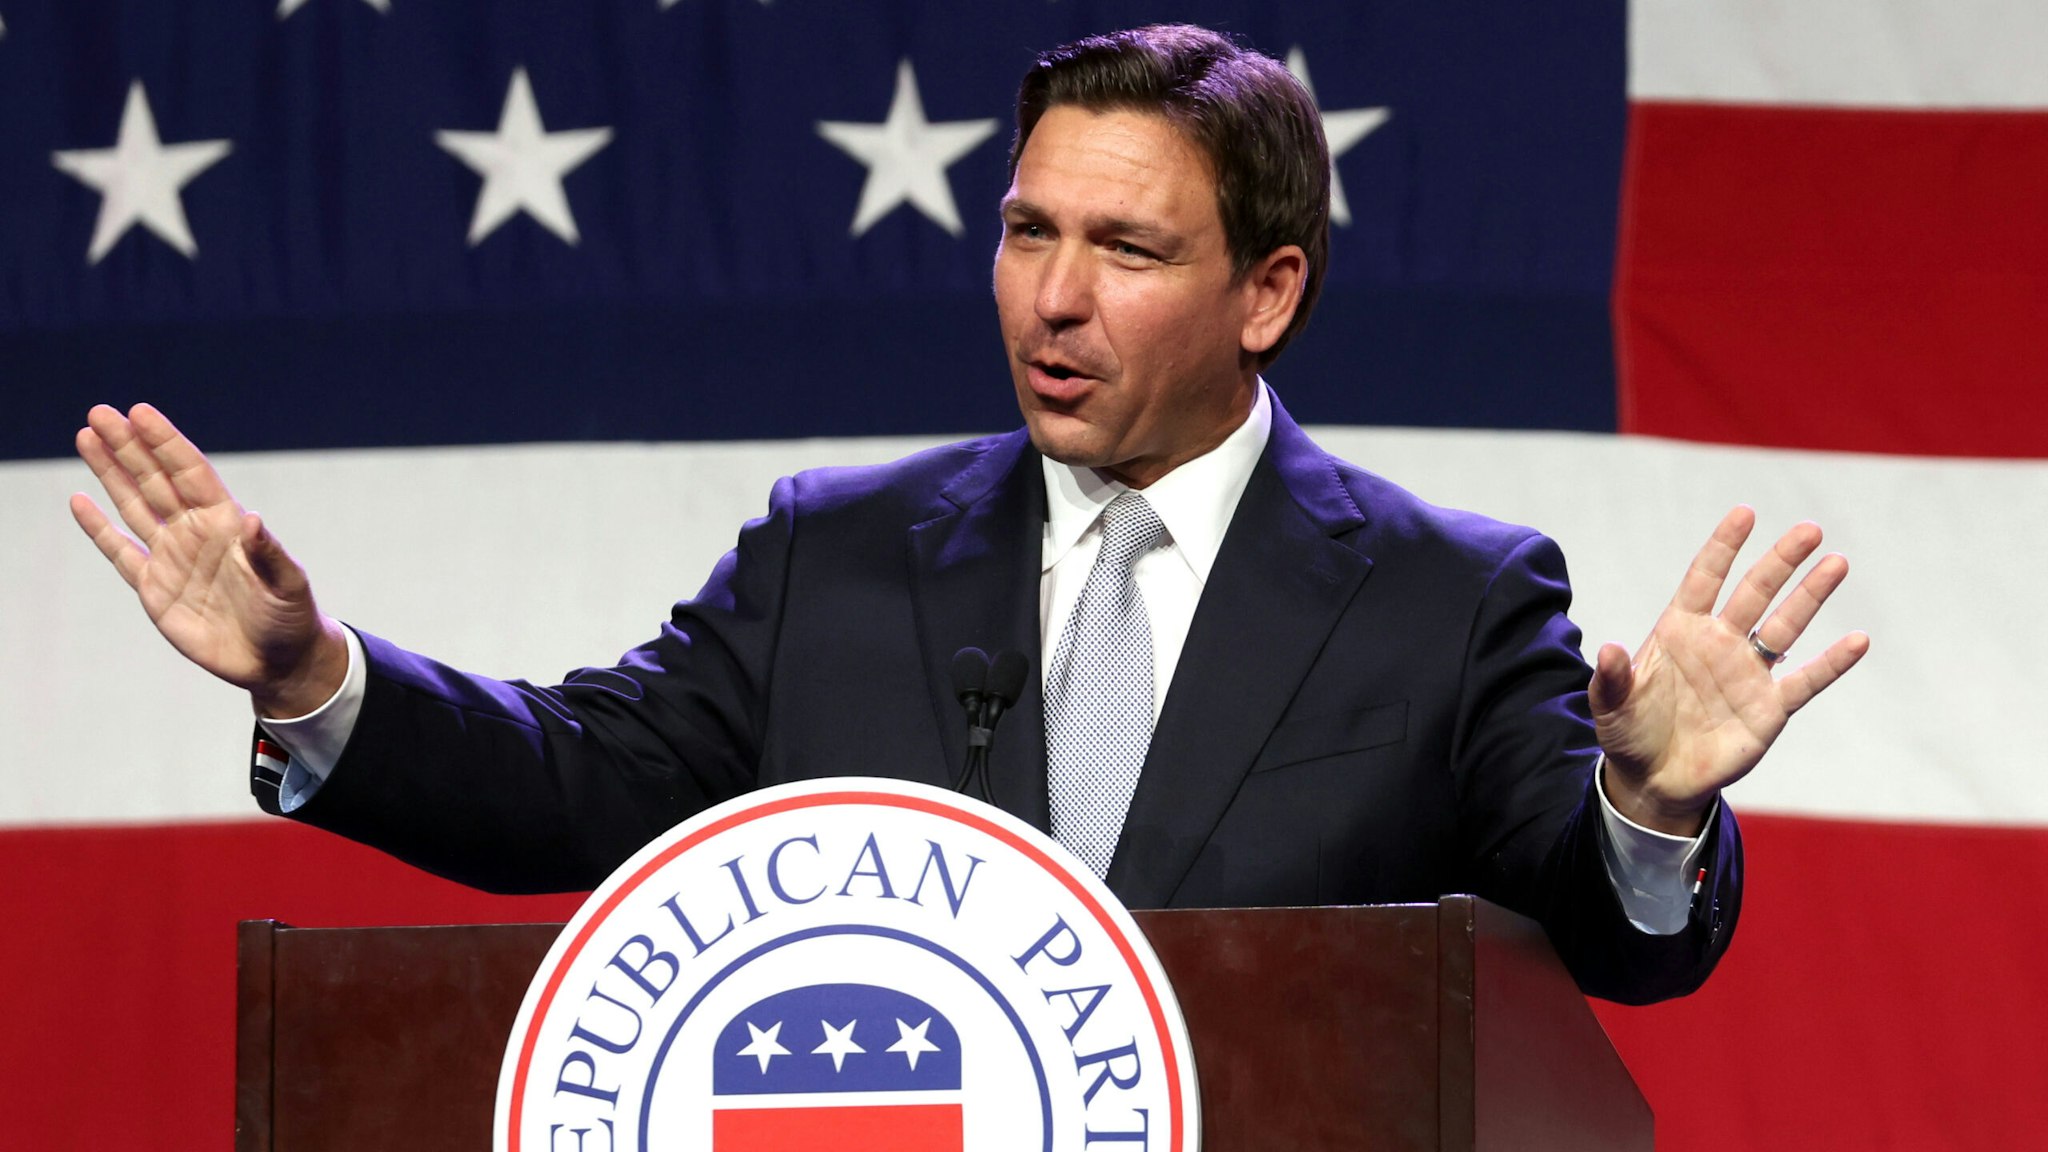 DES MOINES, IOWA - JULY 28: Republican presidential candidate Florida Governor Ron DeSantis speaks to guests at the Republican Party of Iowa 2023 Lincoln Dinner on July 28, 2023 in Des Moines, Iowa. Thirteen Republican presidential candidates were scheduled to speak at the event.